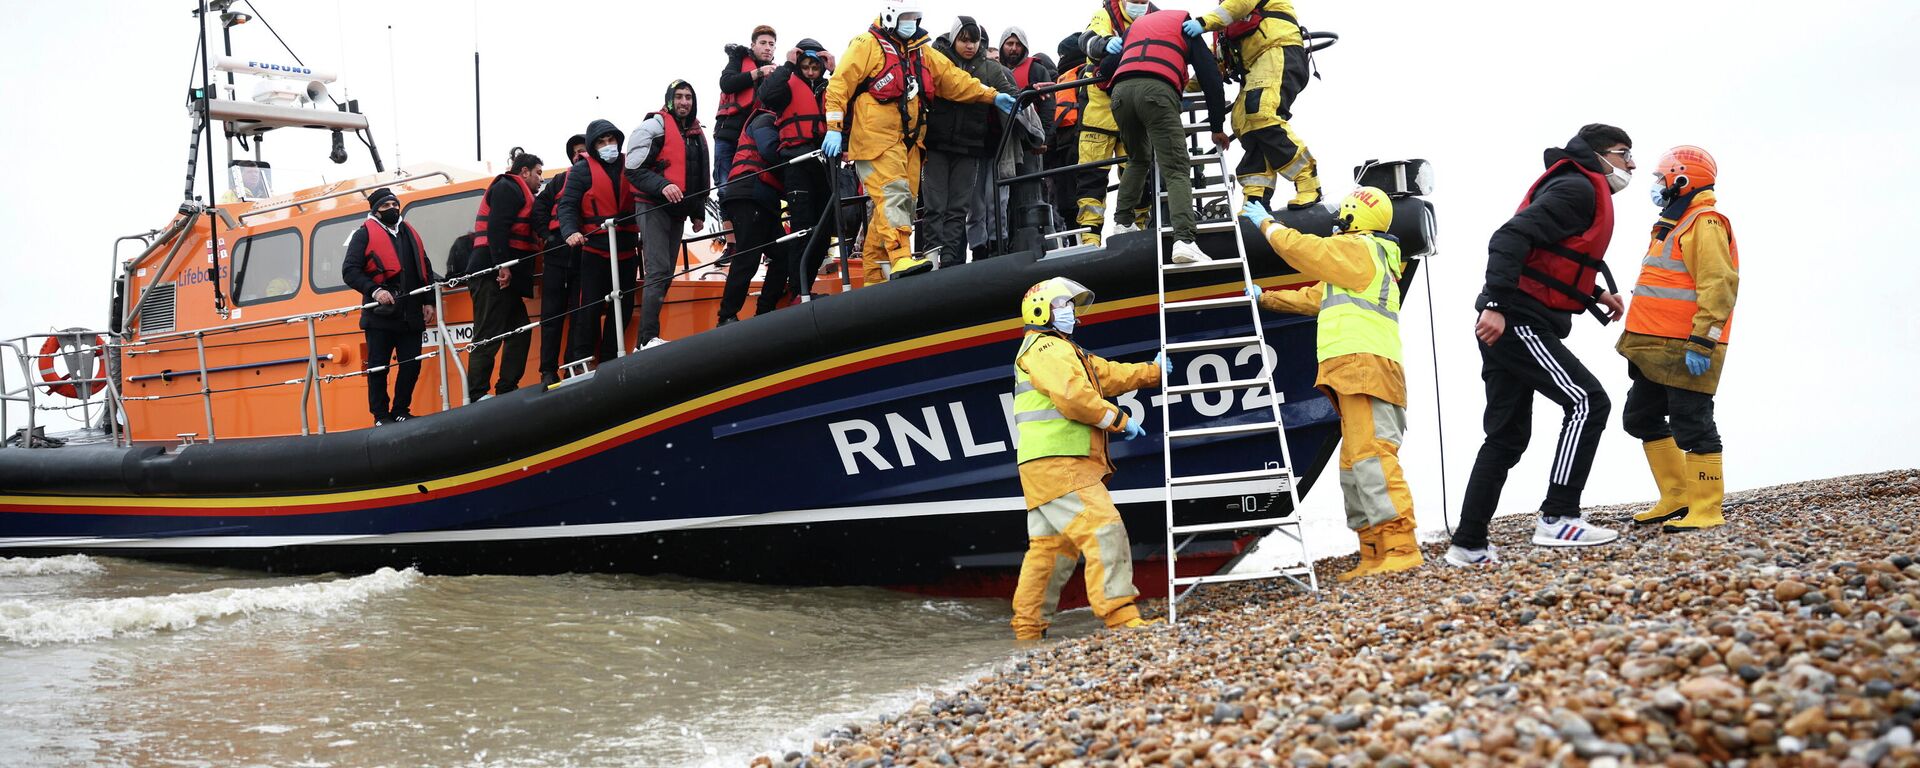 Migrants are brought ashore onboard a RNLI Lifeboat, after having crossed the channel, in Dungeness, Britain, November 24, 2021 - Sputnik International, 1920, 28.11.2021